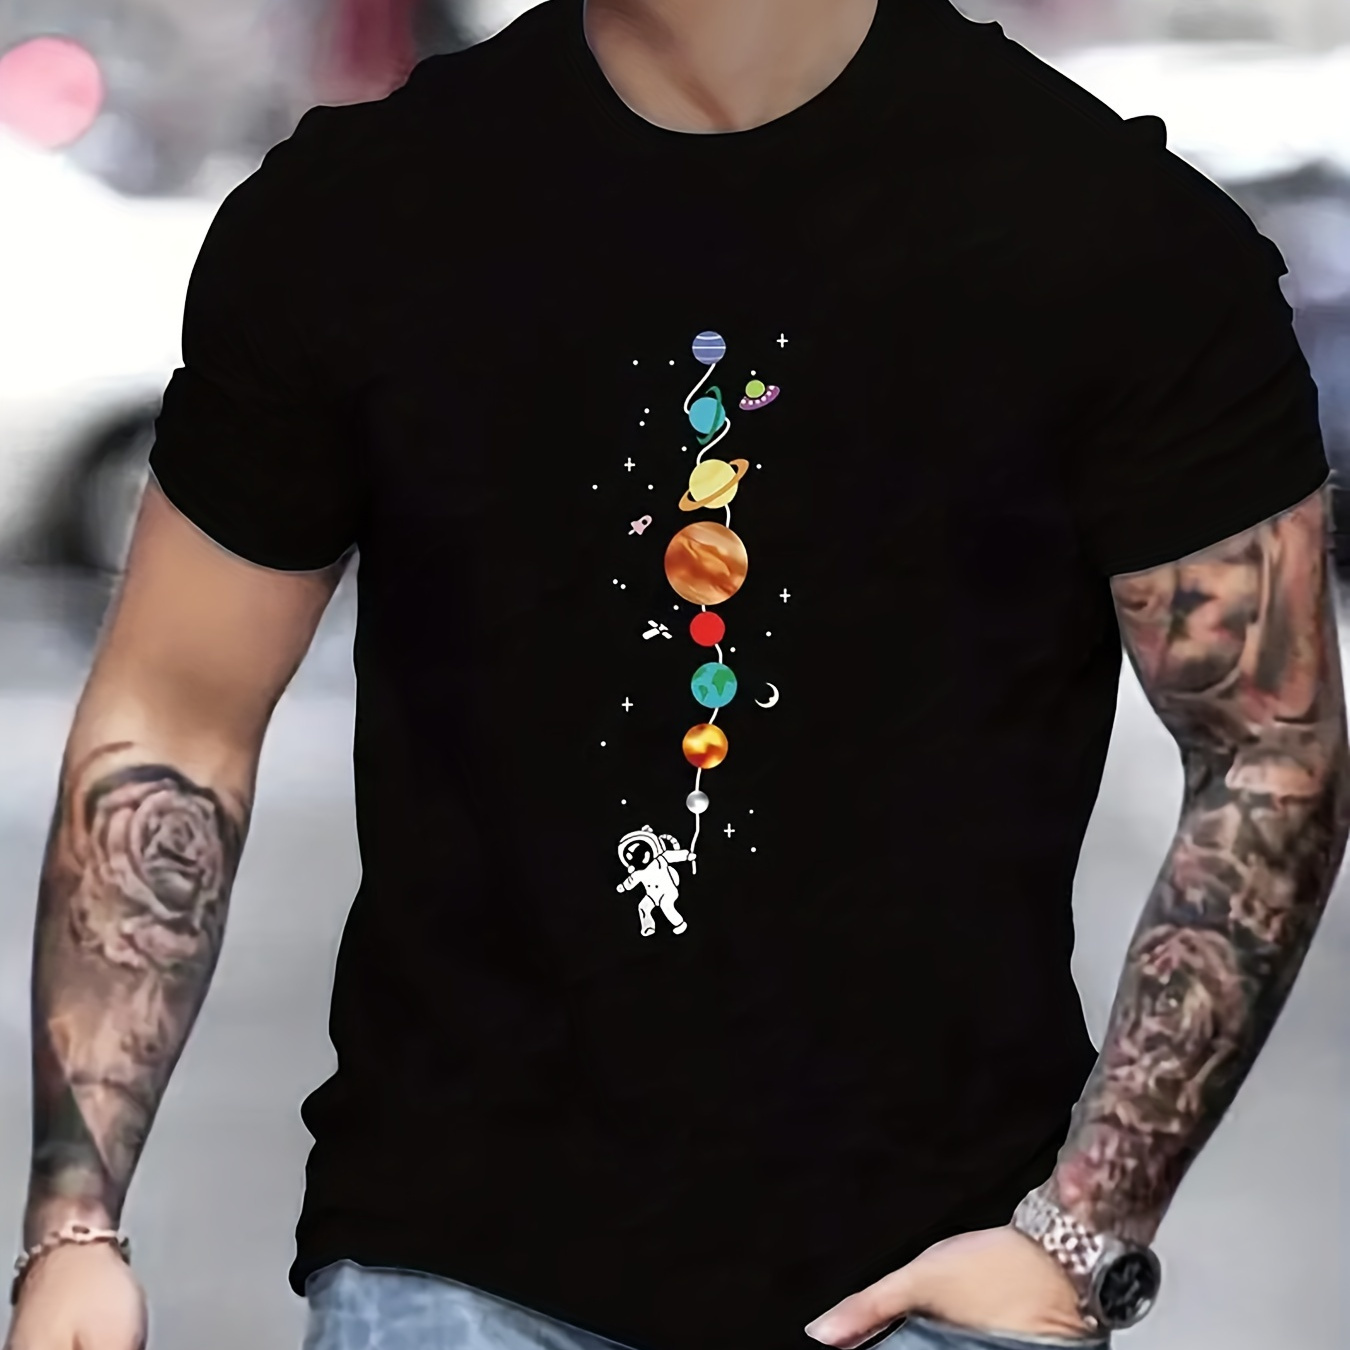 

Men's Cartoon Style Astronaut And Planet Pattern T-shirt With Crew Neck And Short Sleeve, Pure Cotton Tee For Men, Trendy And Chic Top For Summer Daily Wear